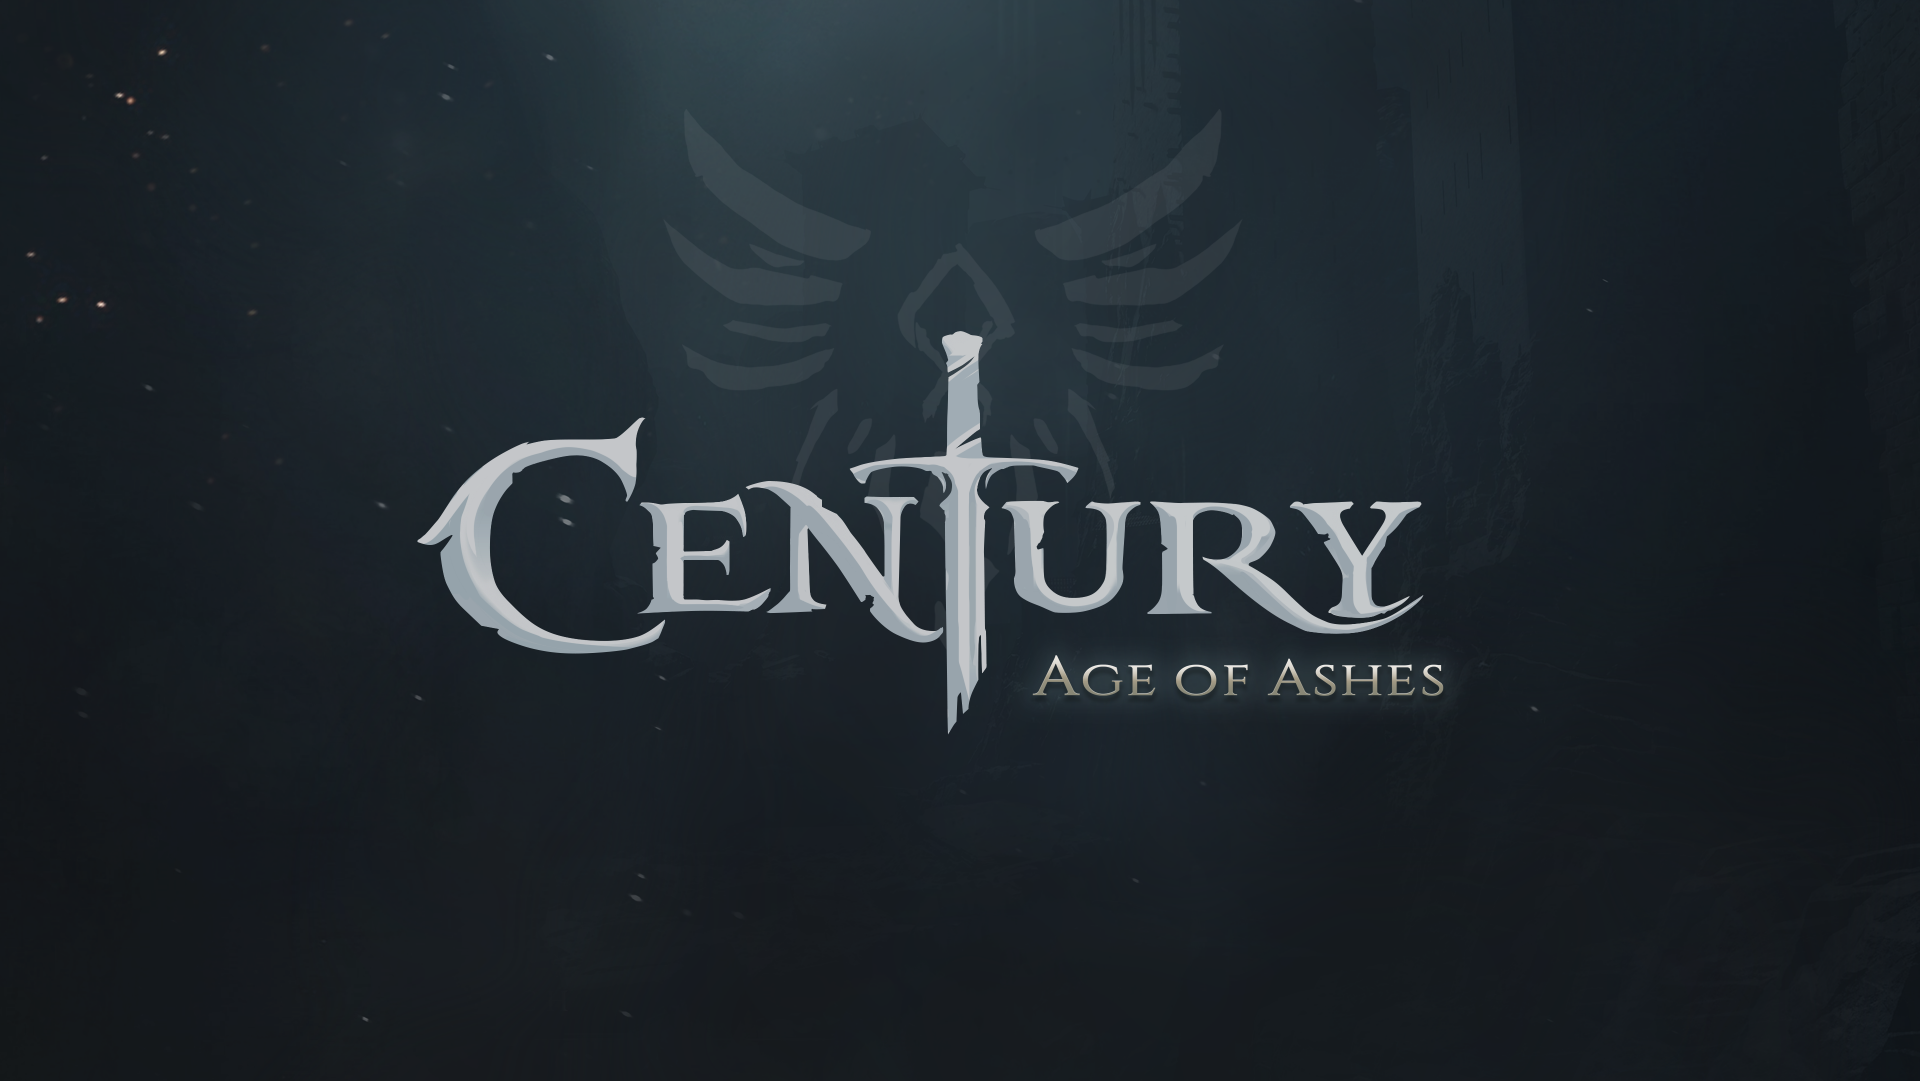 code century: age of ashes